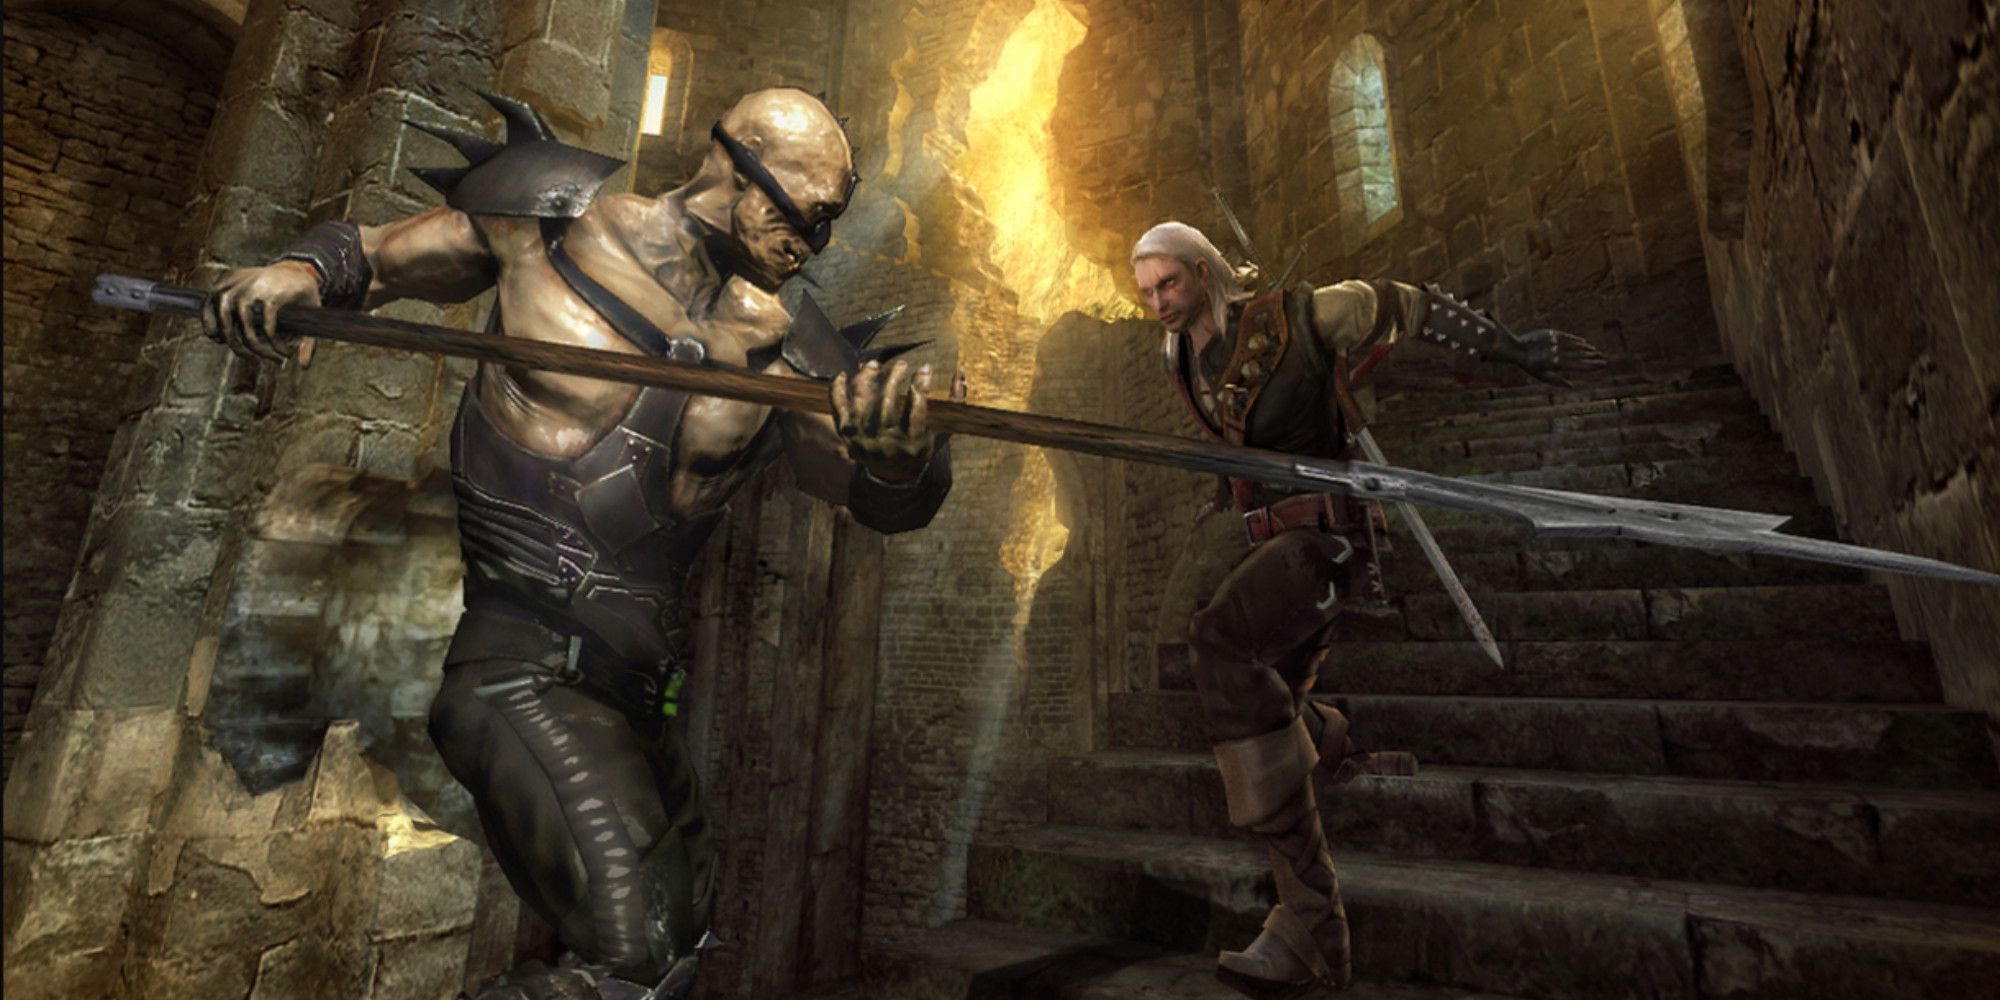 geralt from the witcher fighting a bald man in leather wielding a spear